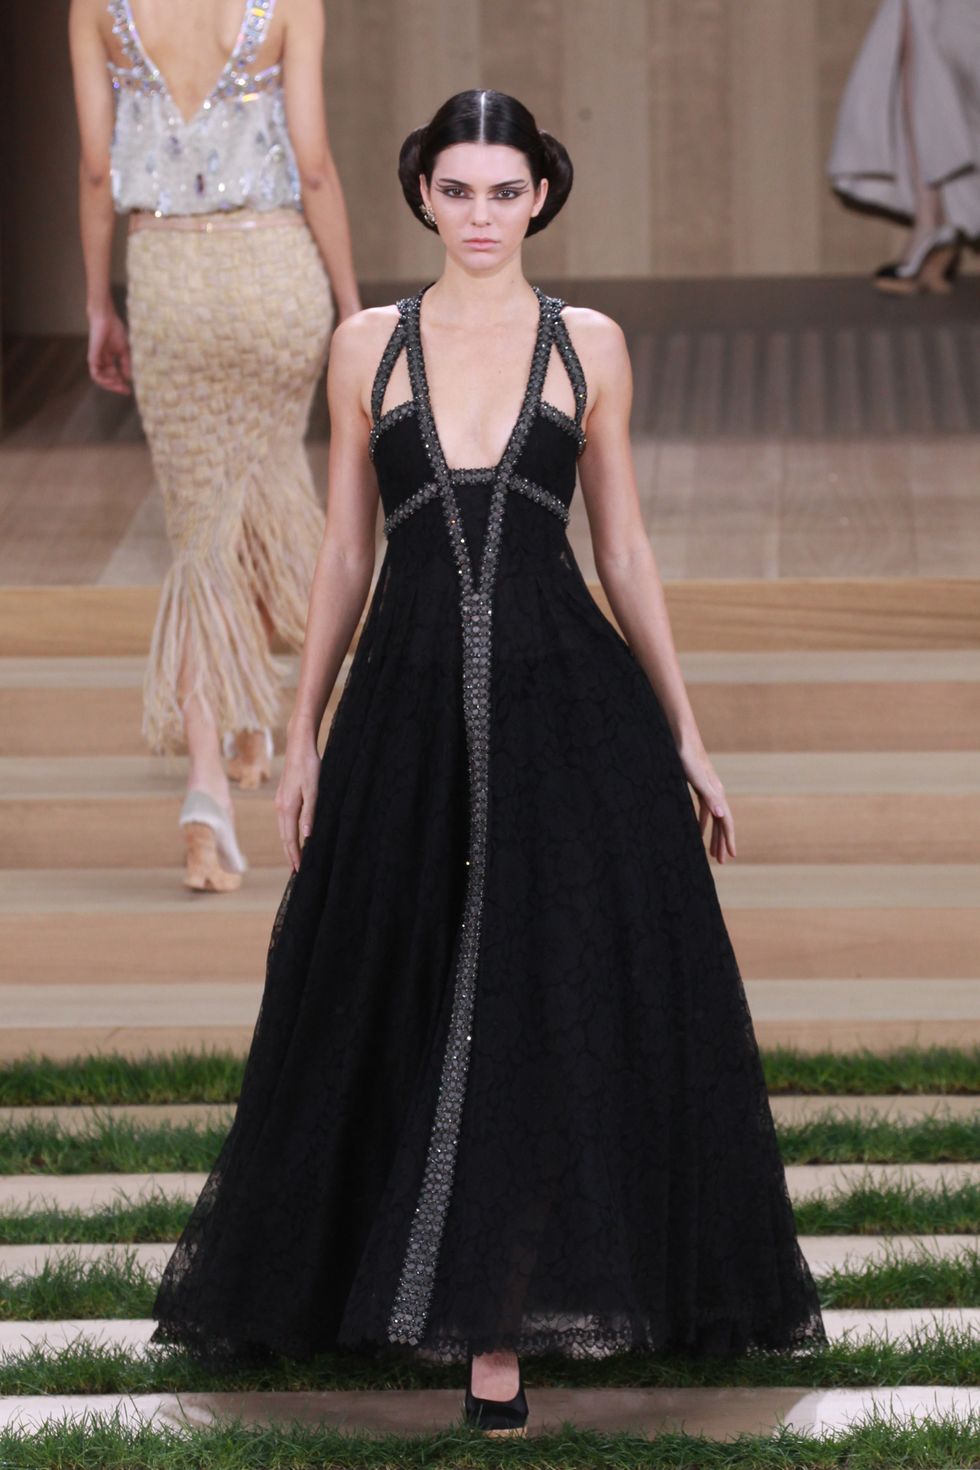 Kendall Jenner on the Chanel catwalk at haute couture fashion week